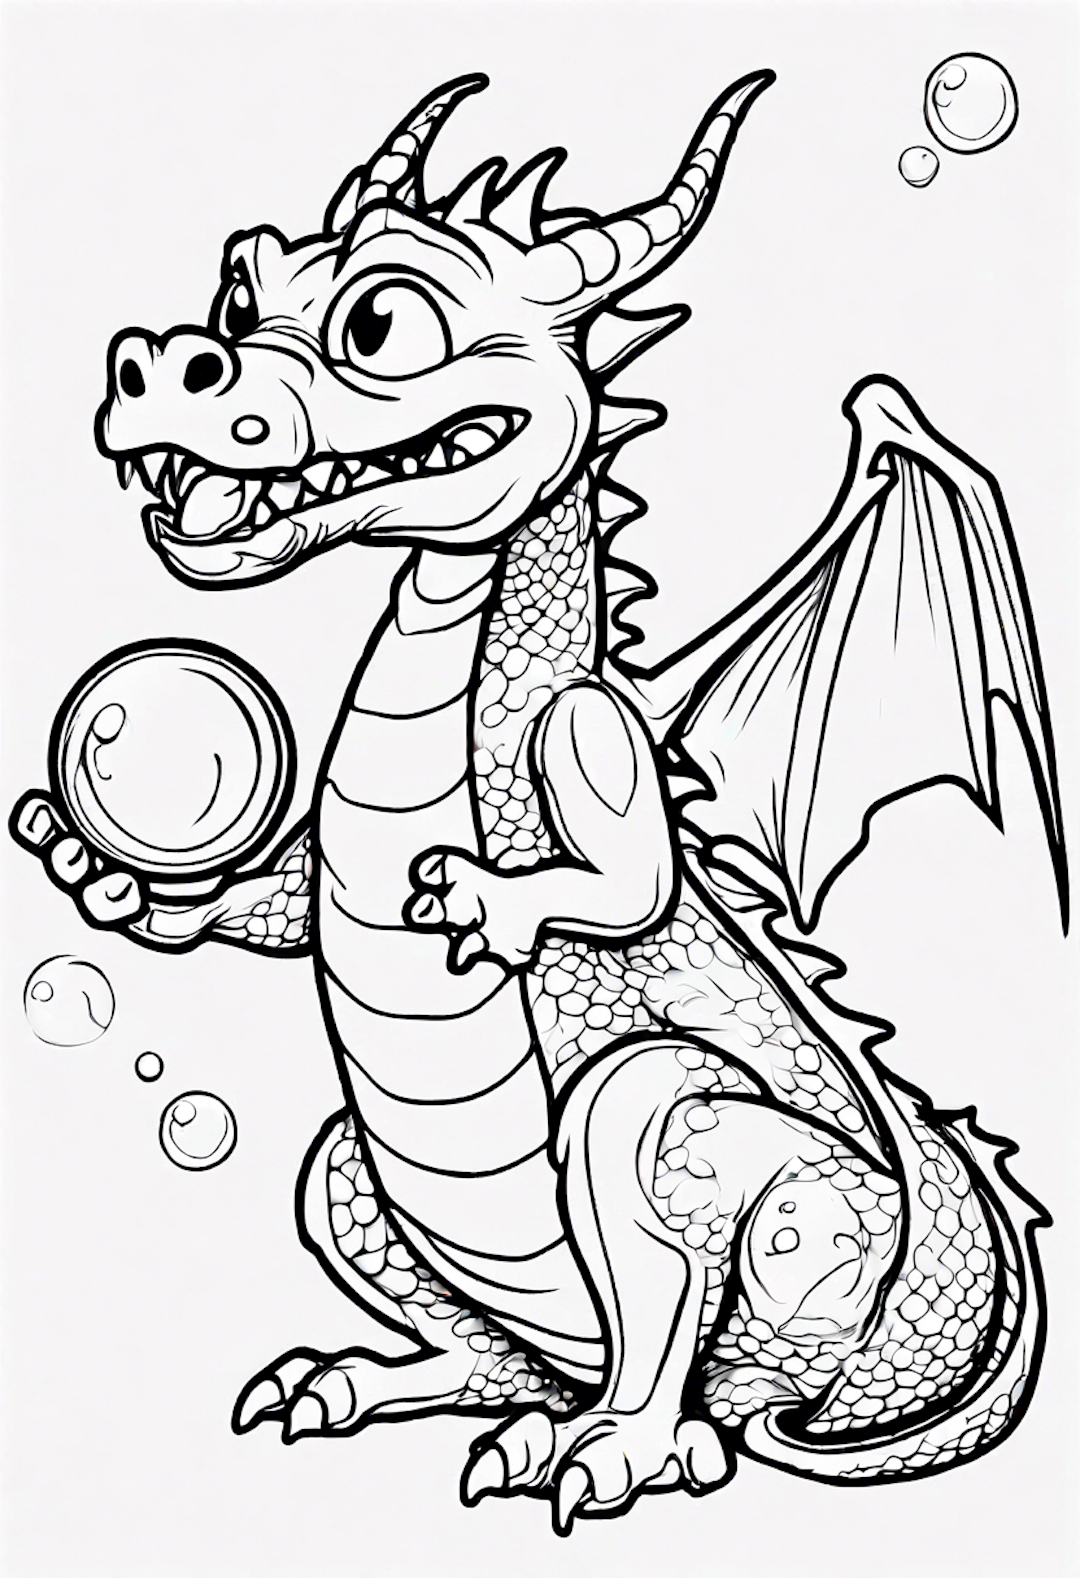 Playful Dragon Blowing Bubbles